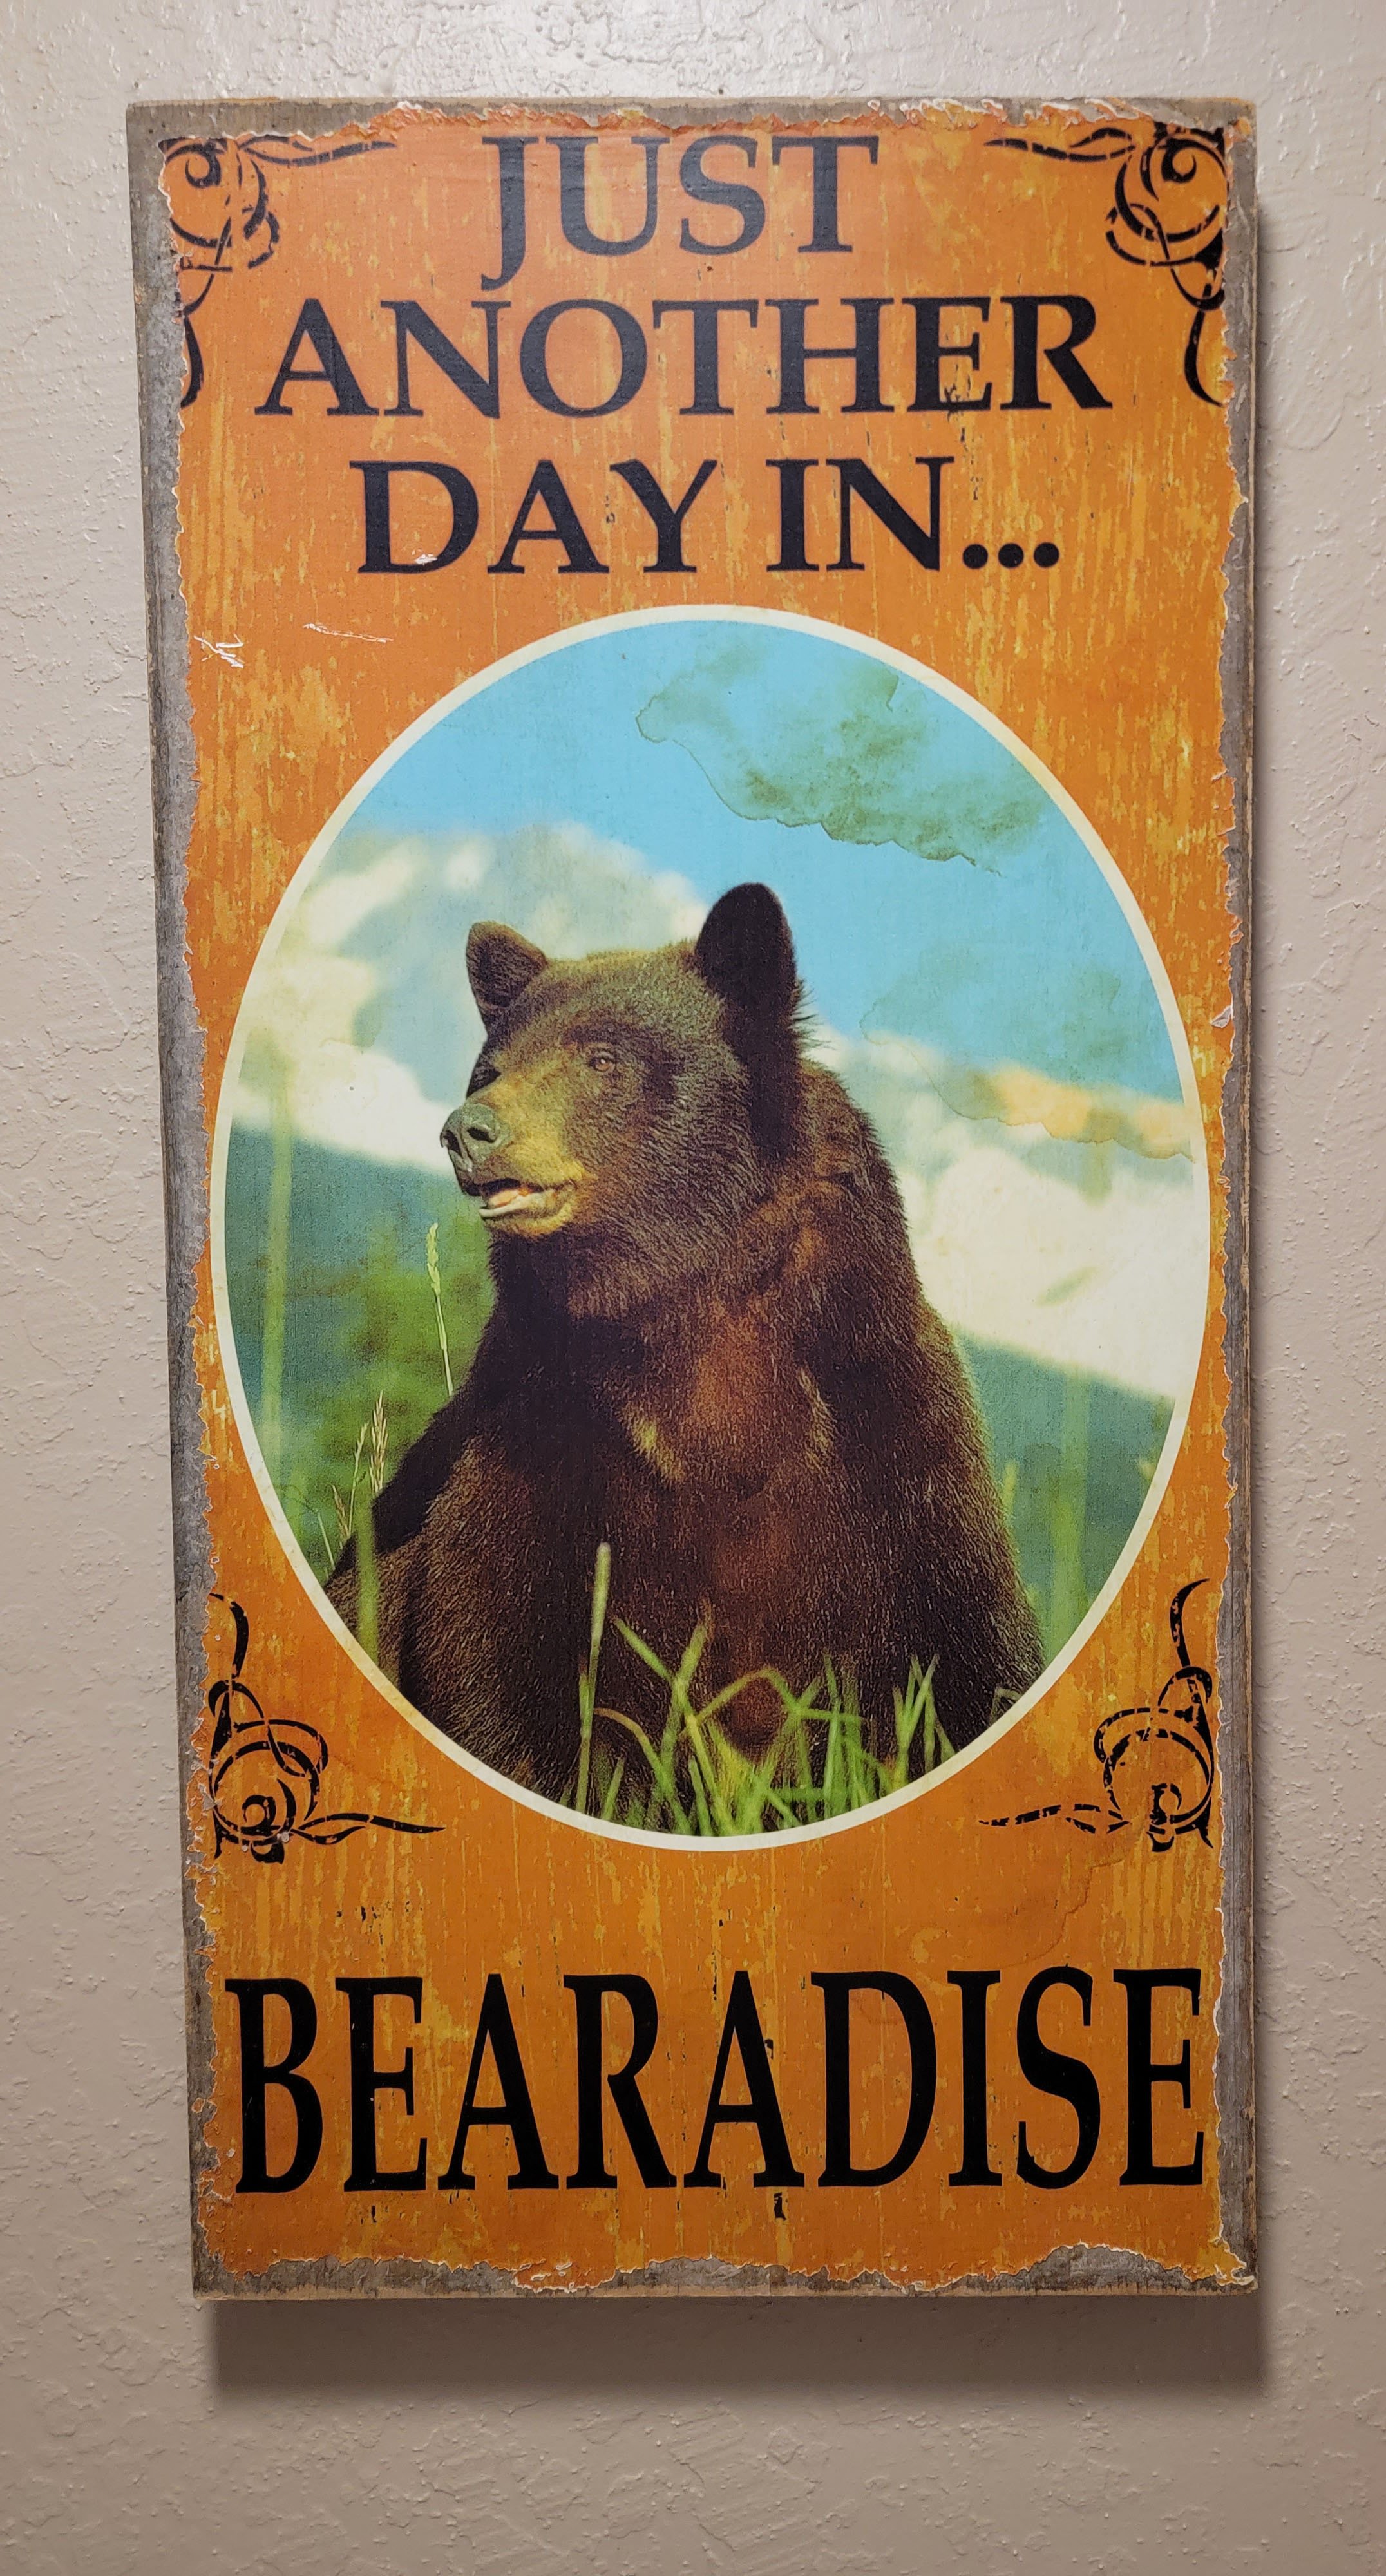 Very bear-themed as well. Like 30 bear related items in the house.